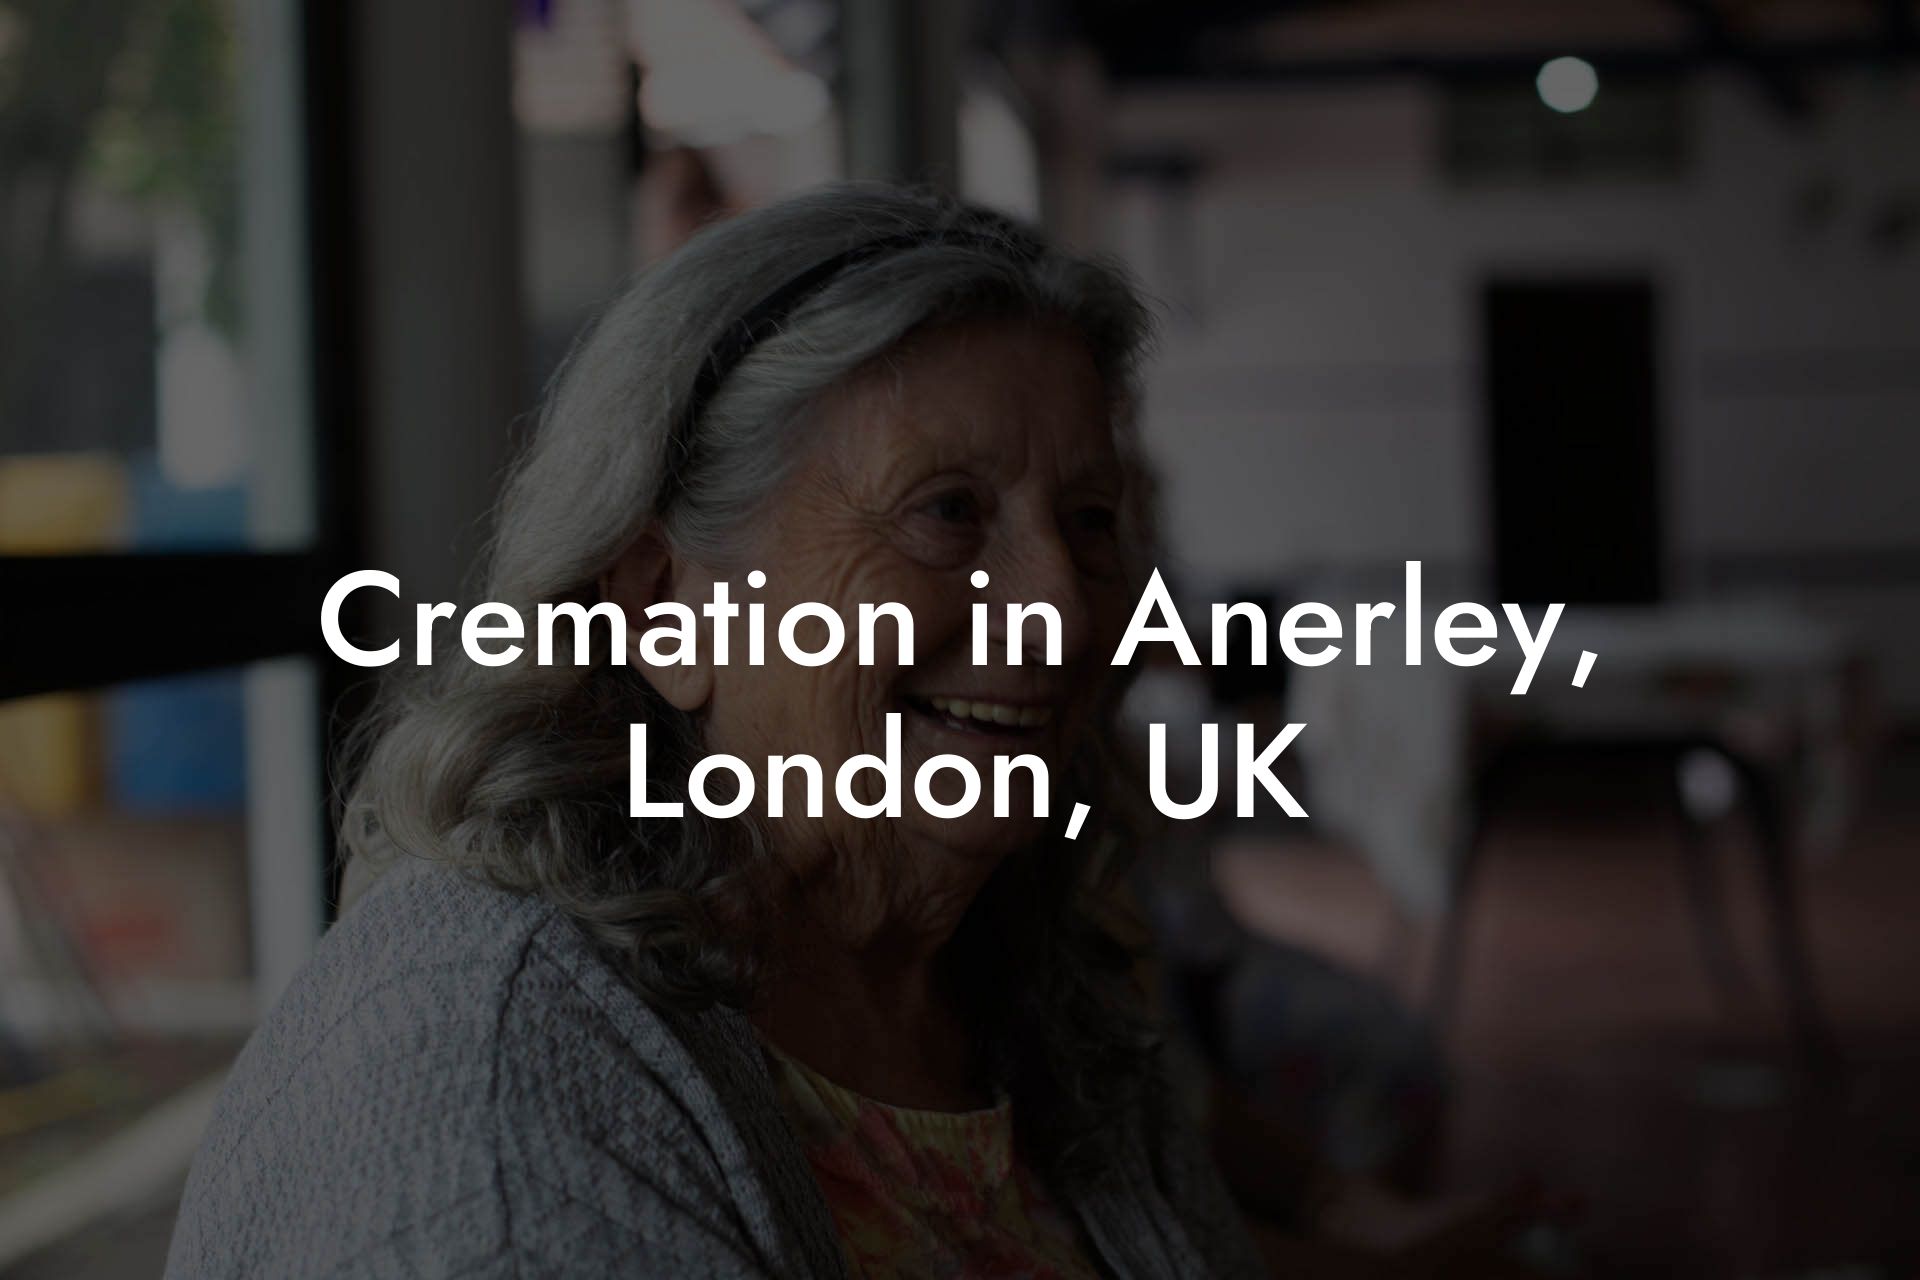 Cremation in Anerley, London, UK